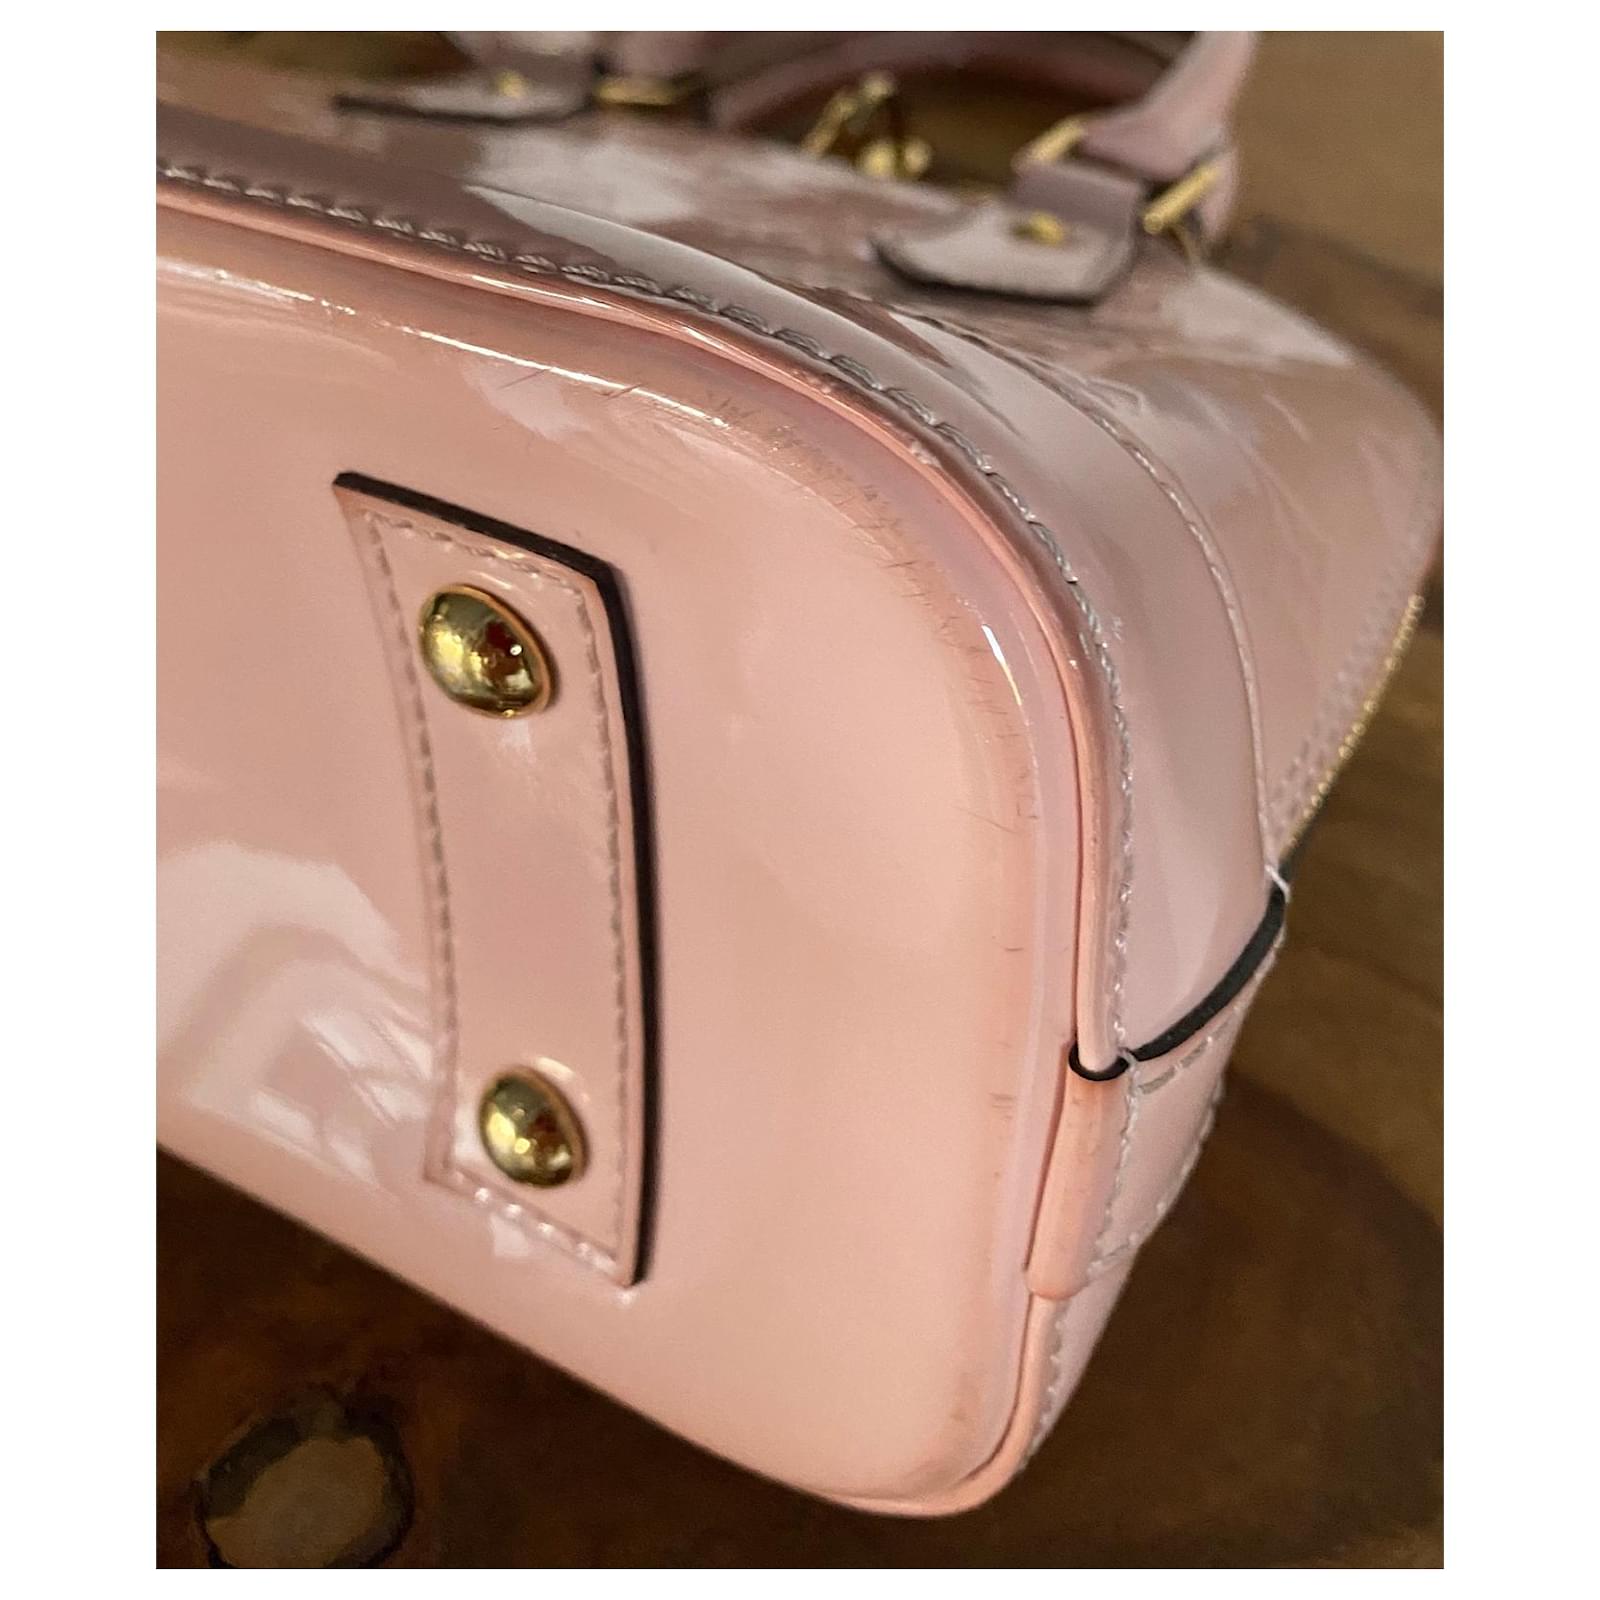 Alma Bb Pink Patent Leather Cross Body Bag – Vegaluxuries